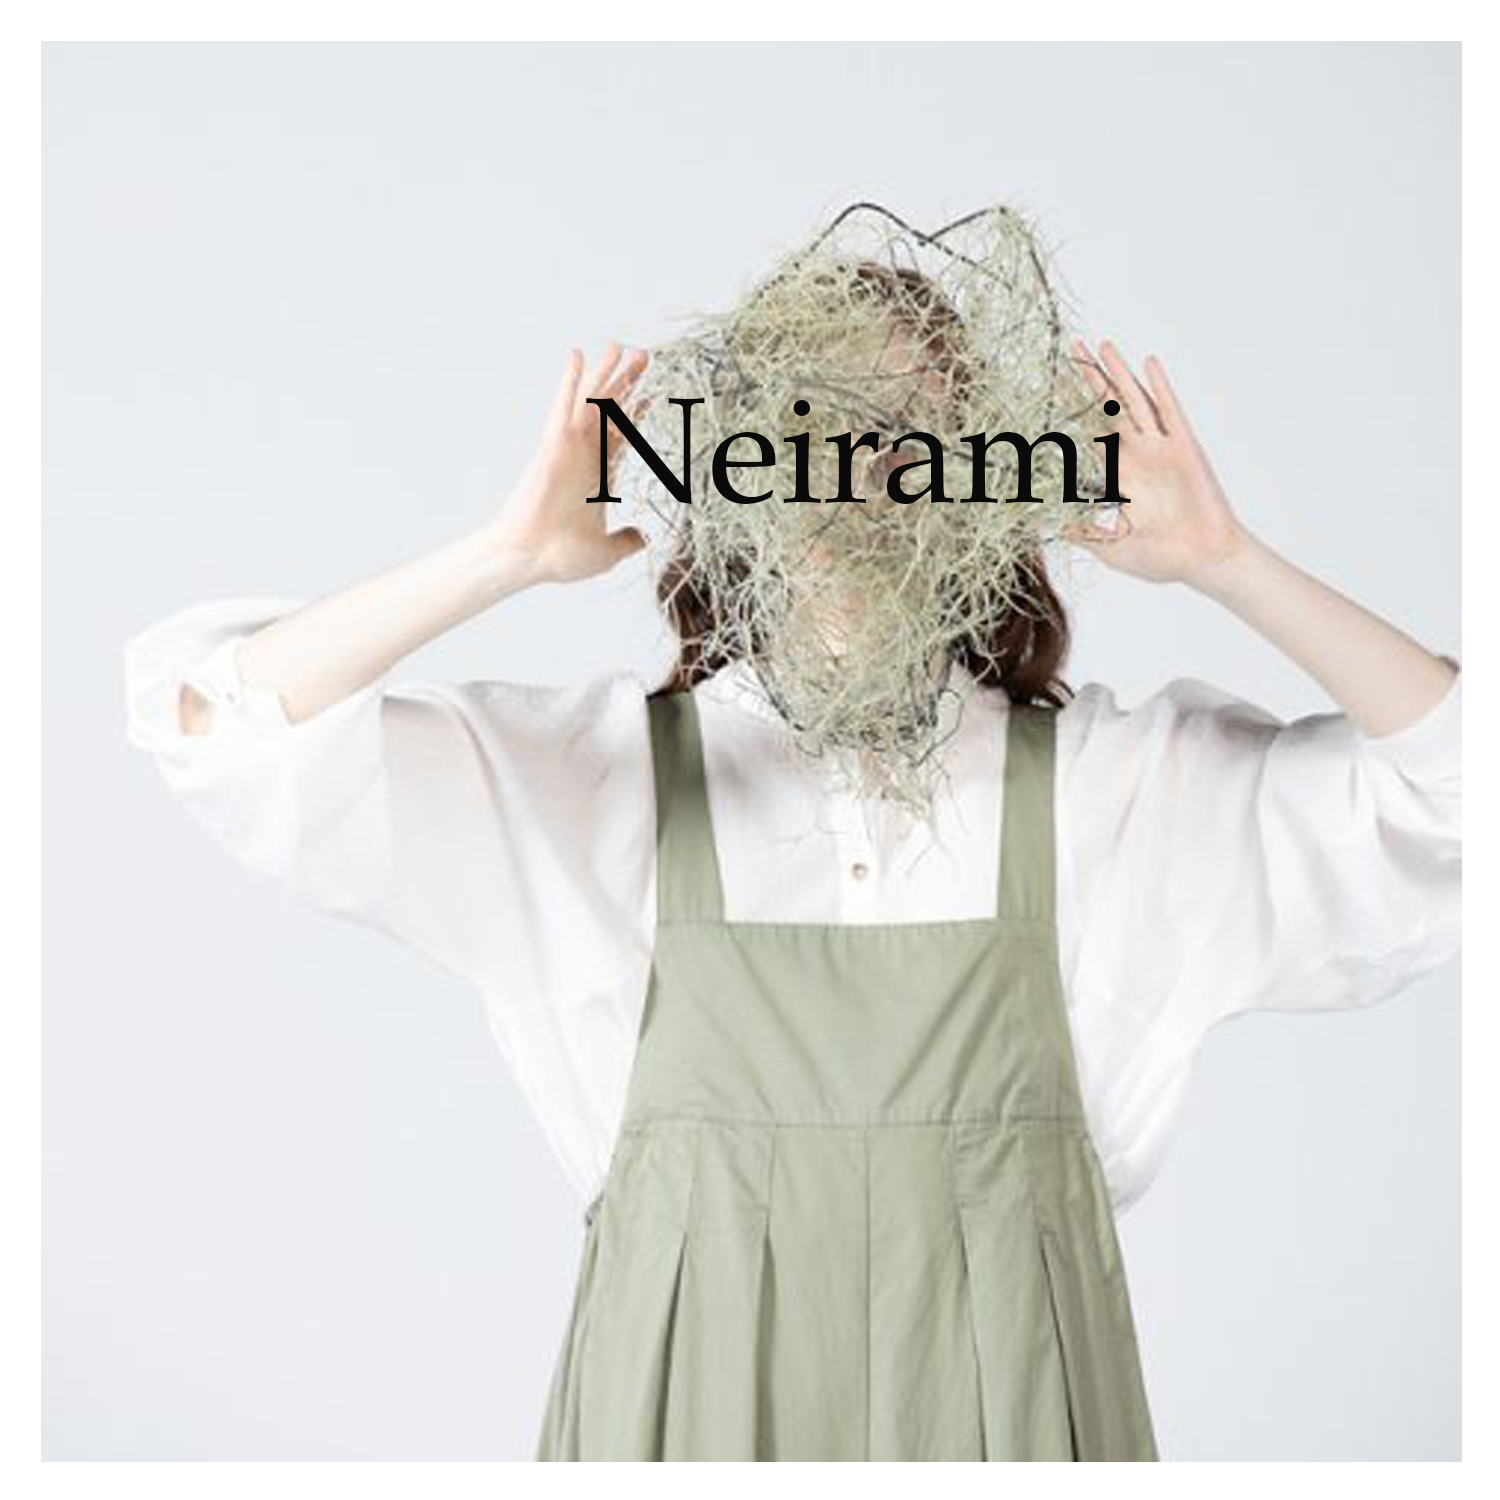 OUR BRANDS "Neirami: lights and lines that give emotions"